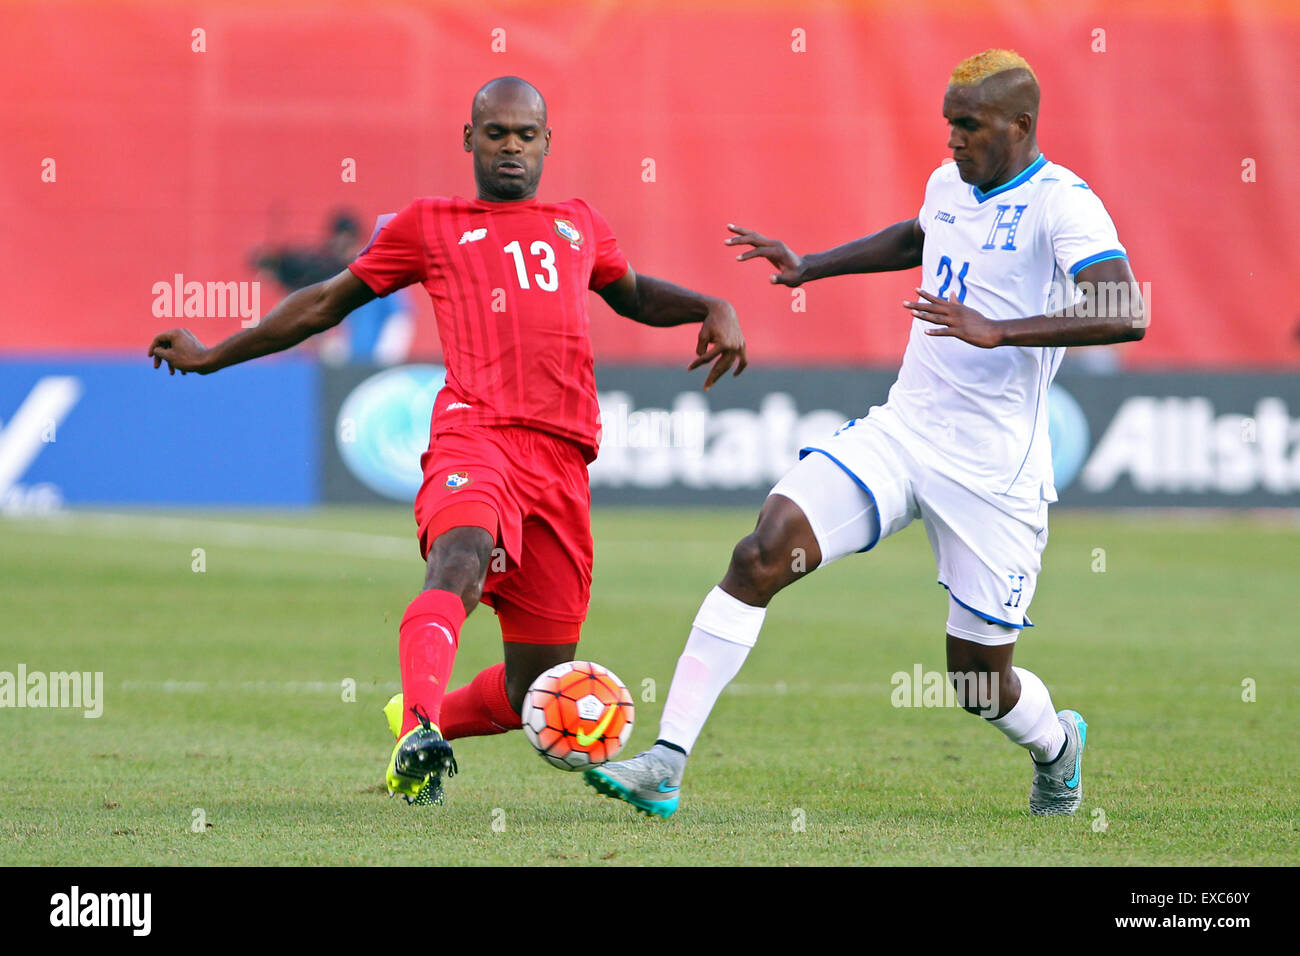 July 10, 2015; Foxborough, MA, USA; Panama defender Adolfo Machado (13) and Honduras defender Brayan Beckeles (21) in action during the CONCACAF Gold Cup match between Panama and Honduras at Gillette Stadium. The match ended in a 1-1 tie. Anthony Nesmith/Cal Sport Media Stock Photo